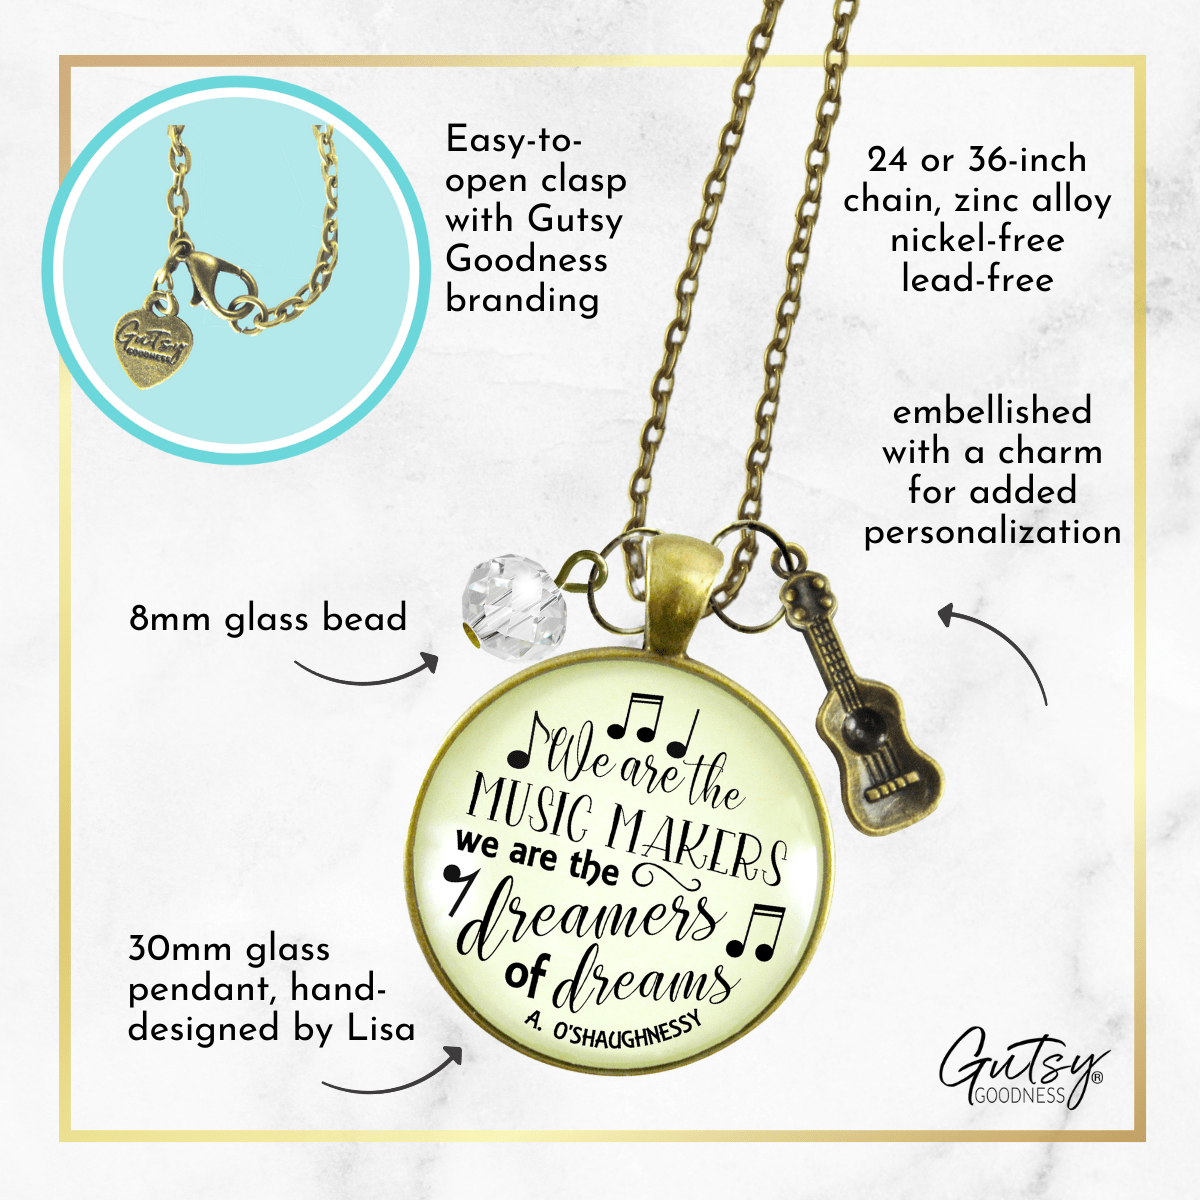 Gutsy Goodness Guitar Player Necklace We are Music Makers Musician Teacher Gift - Gutsy Goodness Handmade Jewelry;Guitar Player Necklace We Are Music Makers Musician Teacher Gift - Gutsy Goodness Handmade Jewelry Gifts